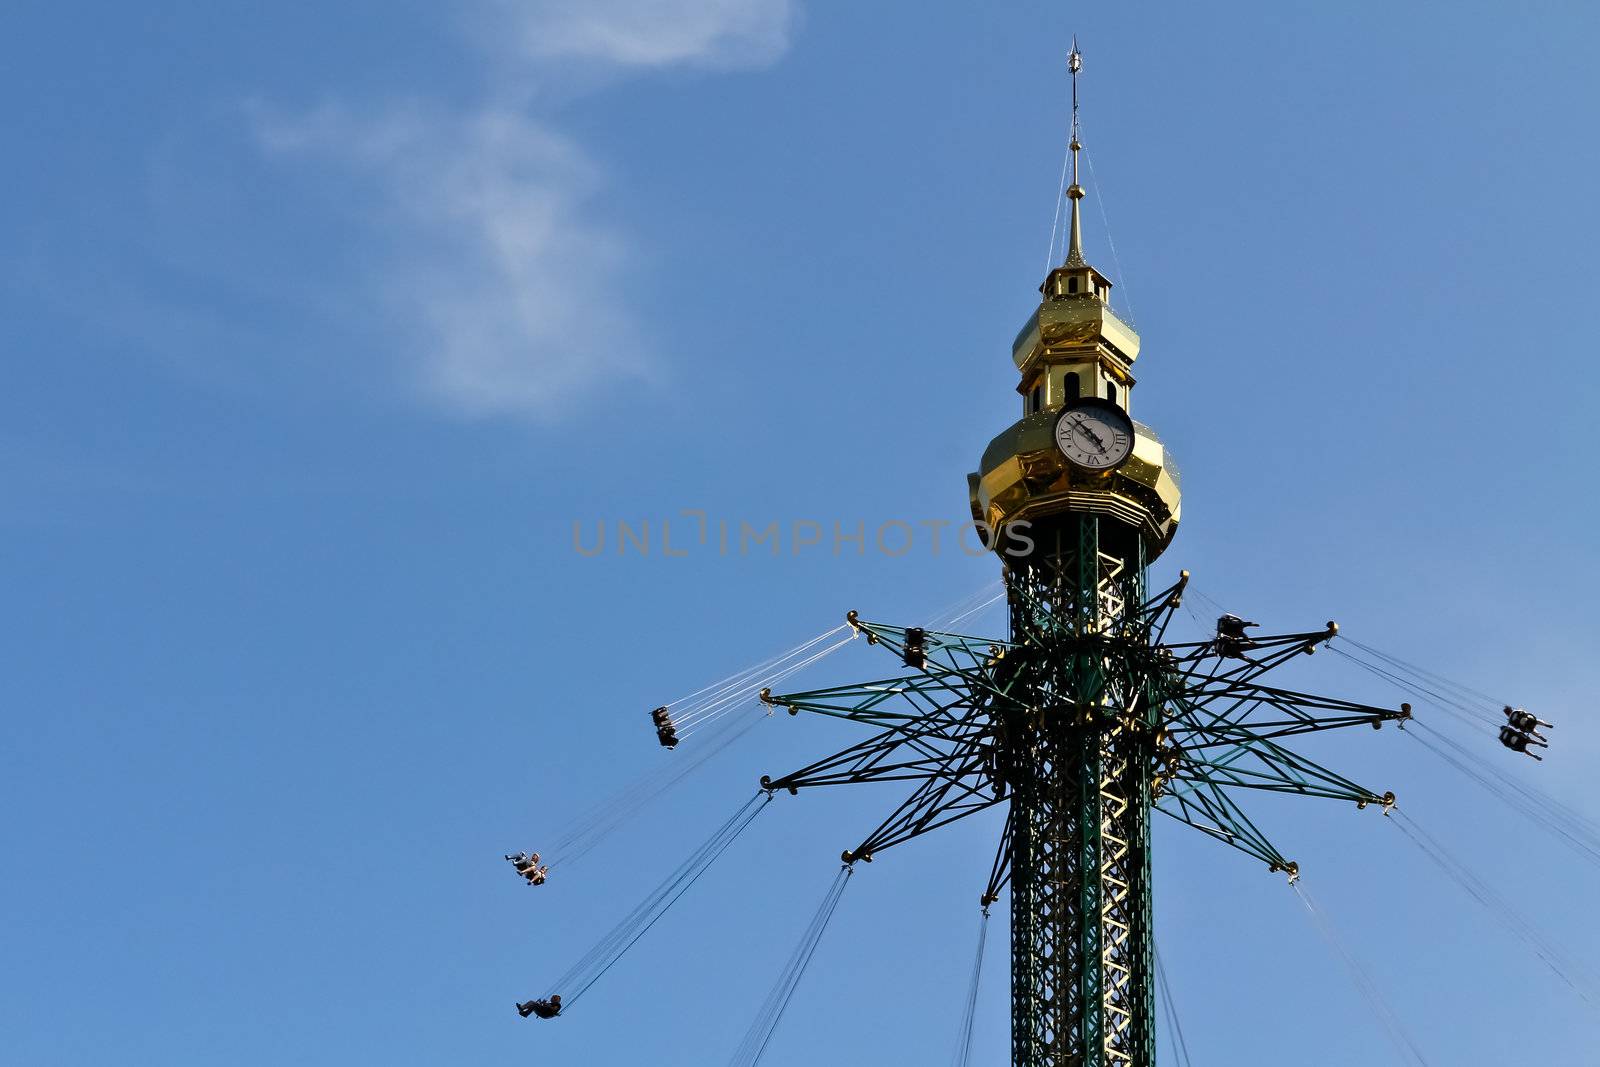 Carousel high up in the sky by kyrien